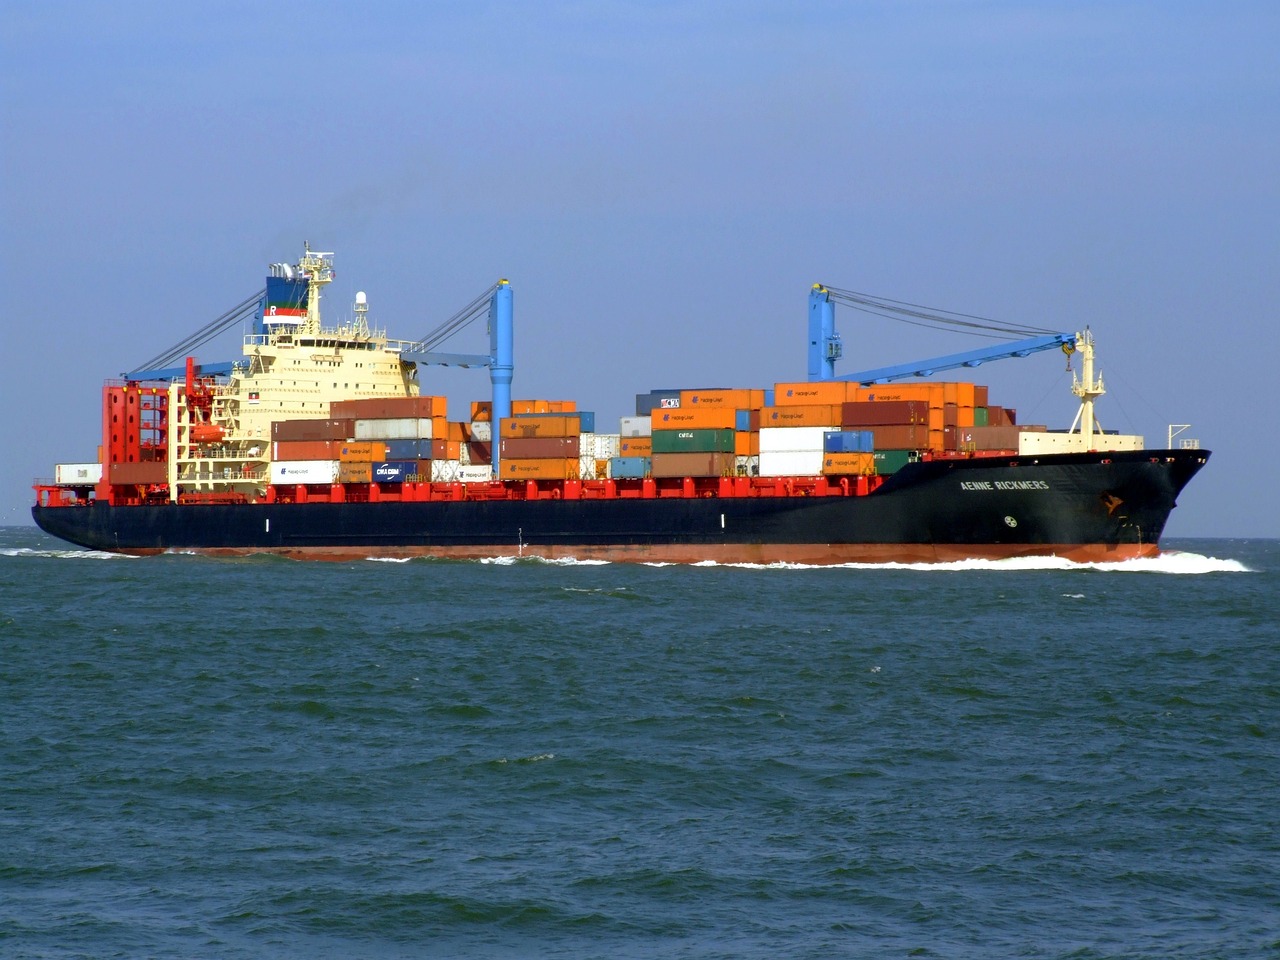 An ultra large container ship with refrigerated containers and steel boxes